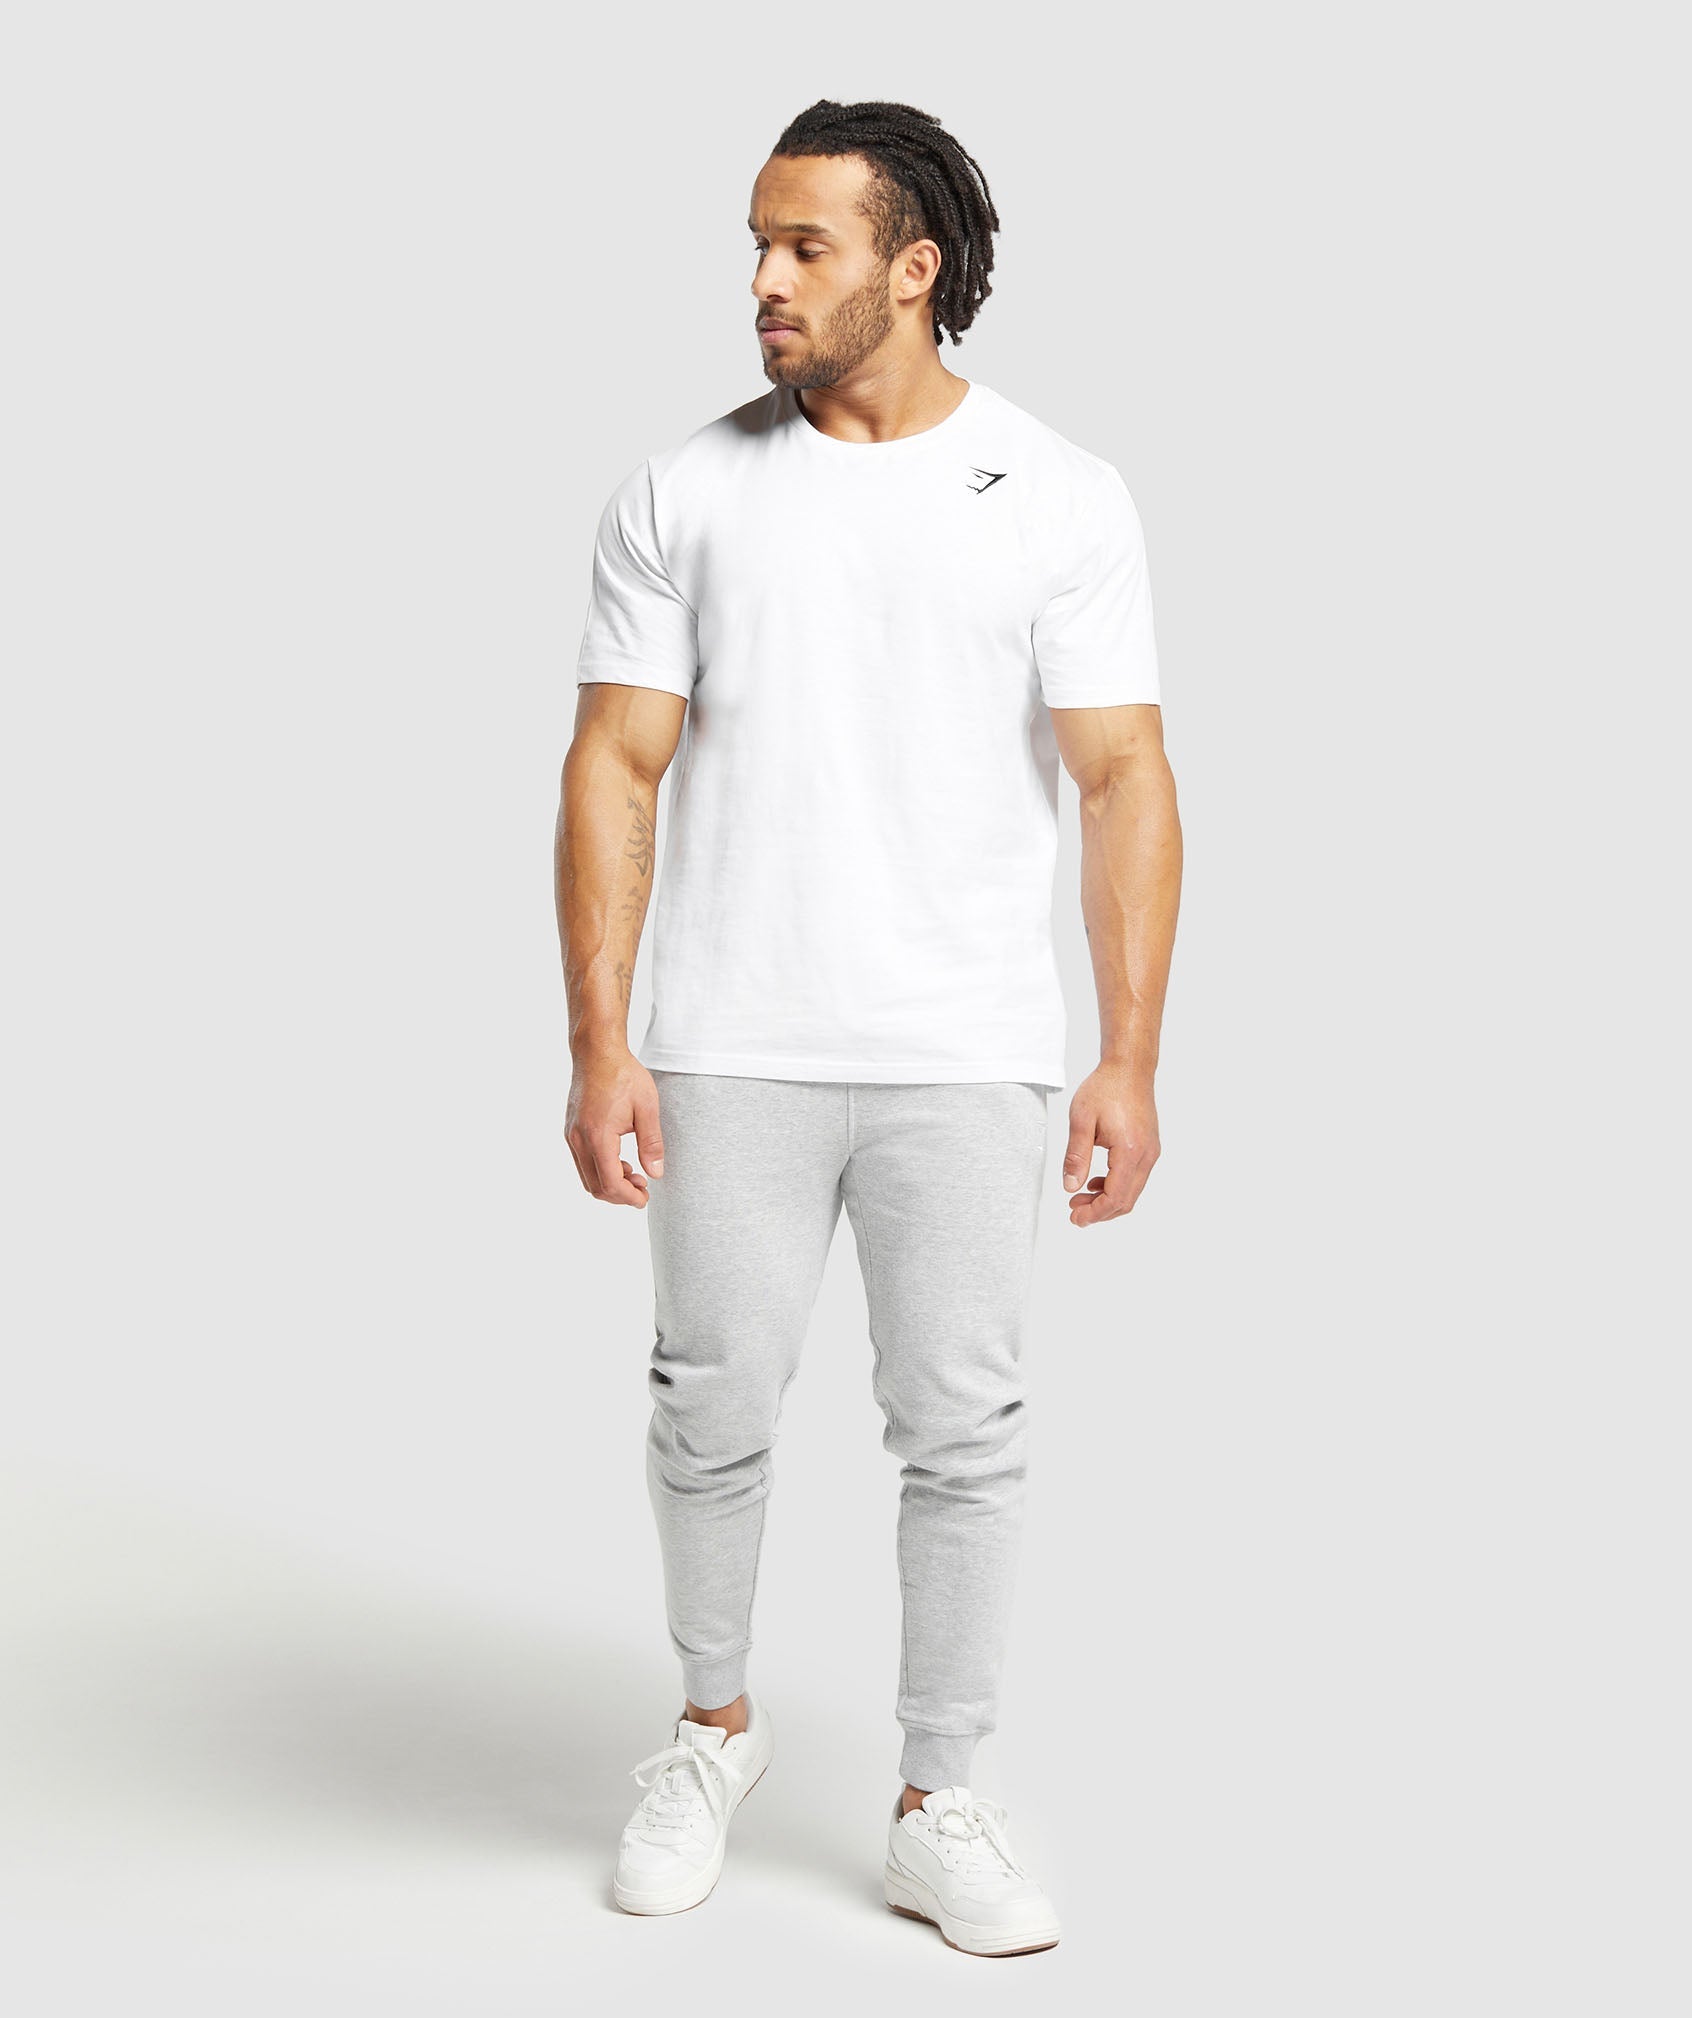 Crest Joggers in Light Grey Marl - view 3